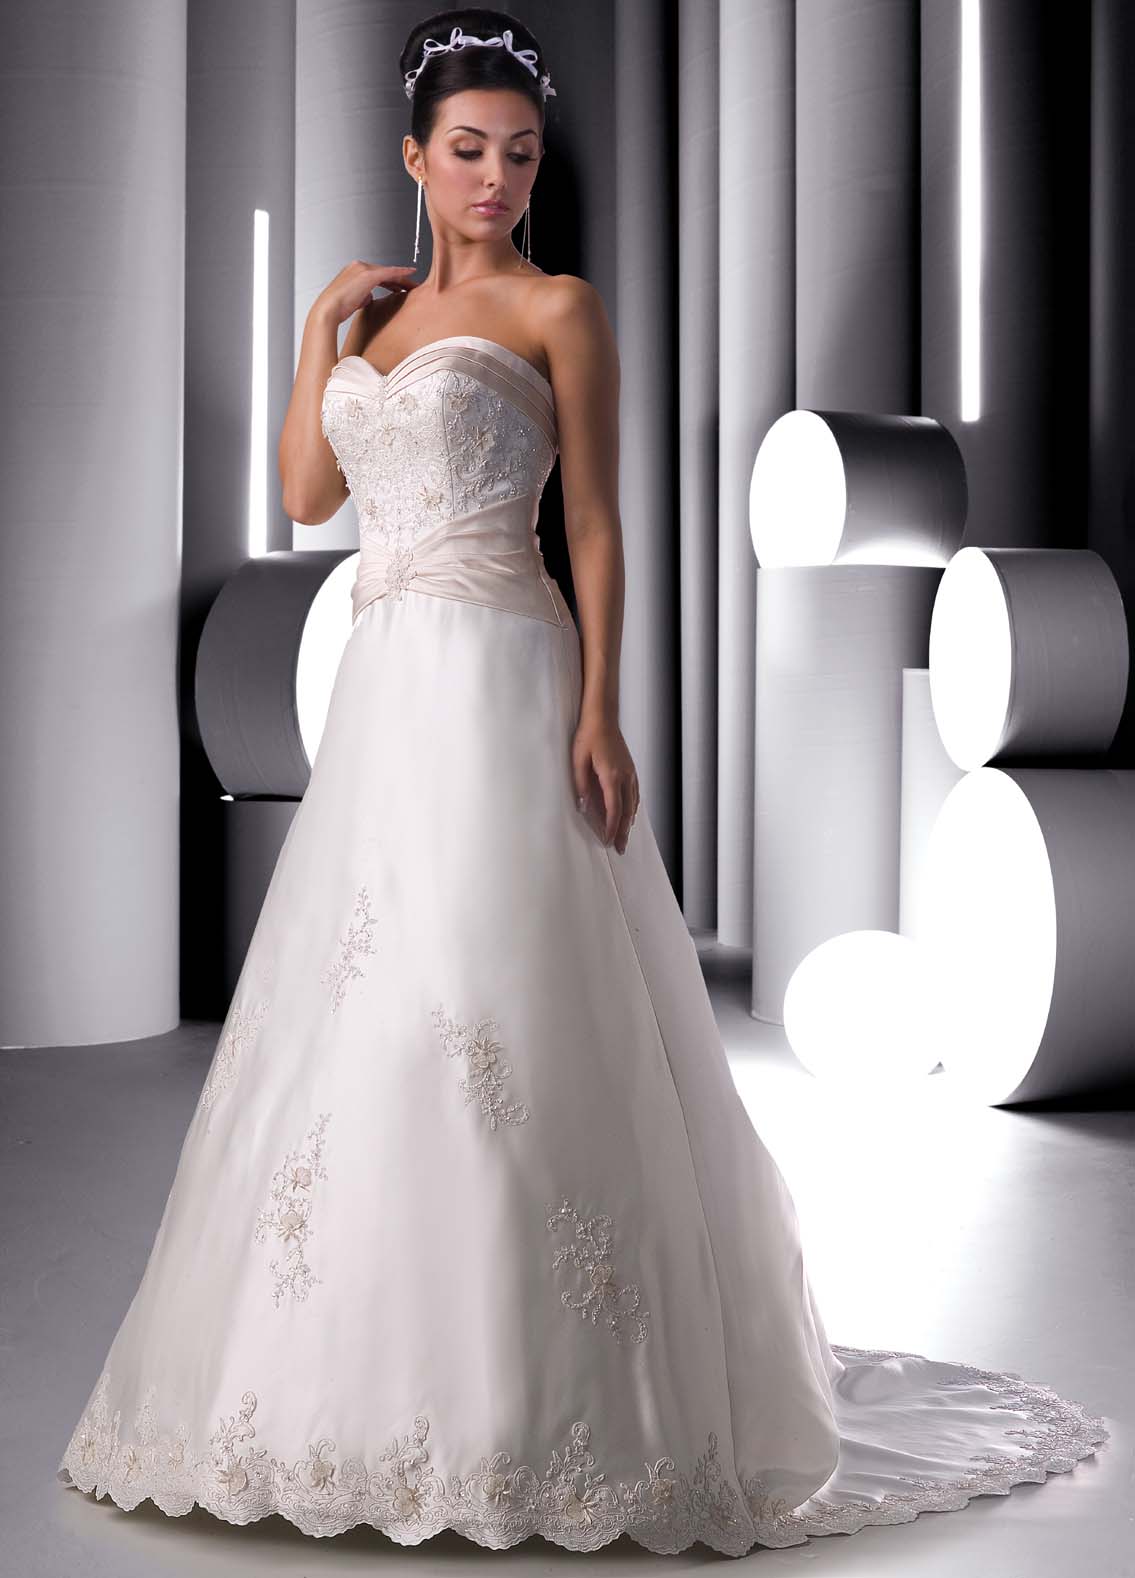 Bridal Gown with scalloped hem